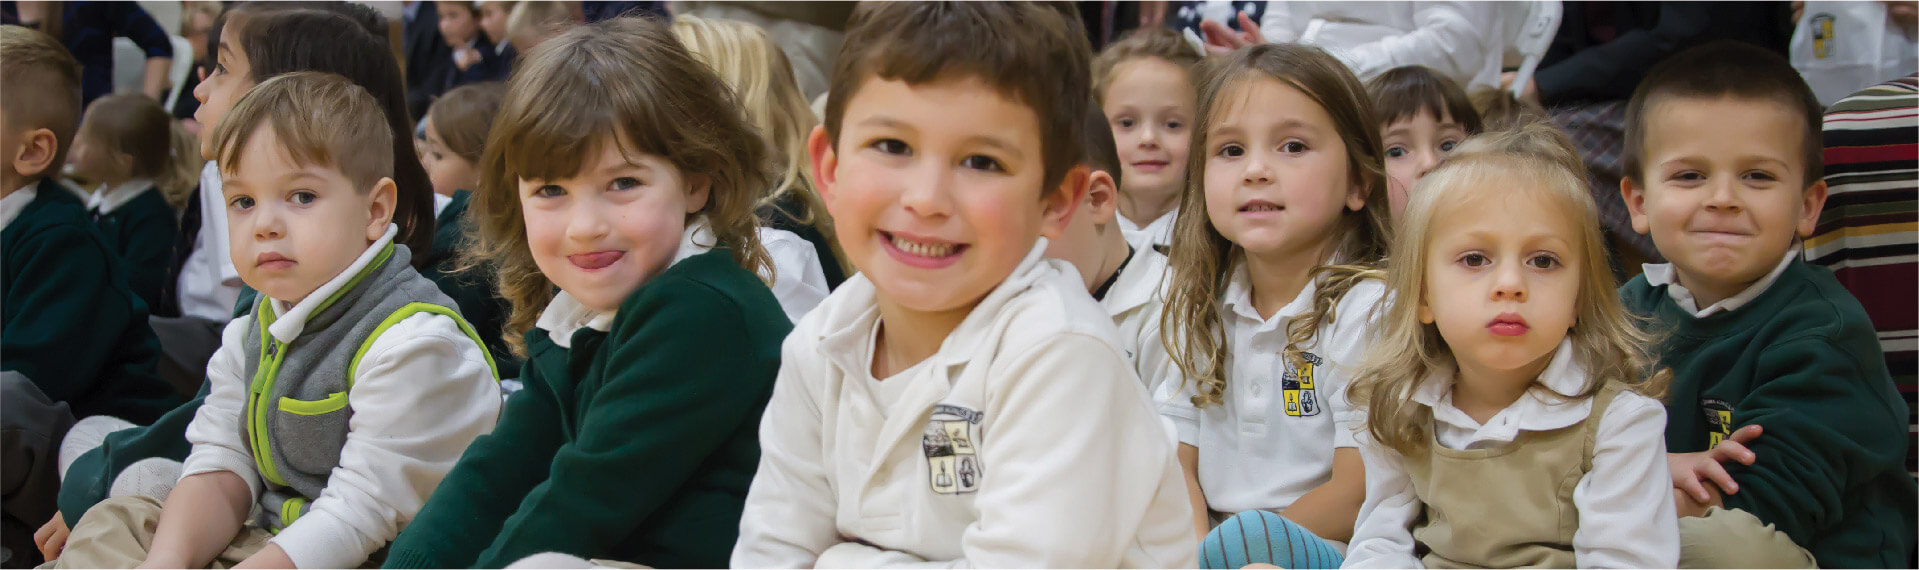 Early year students group assembly